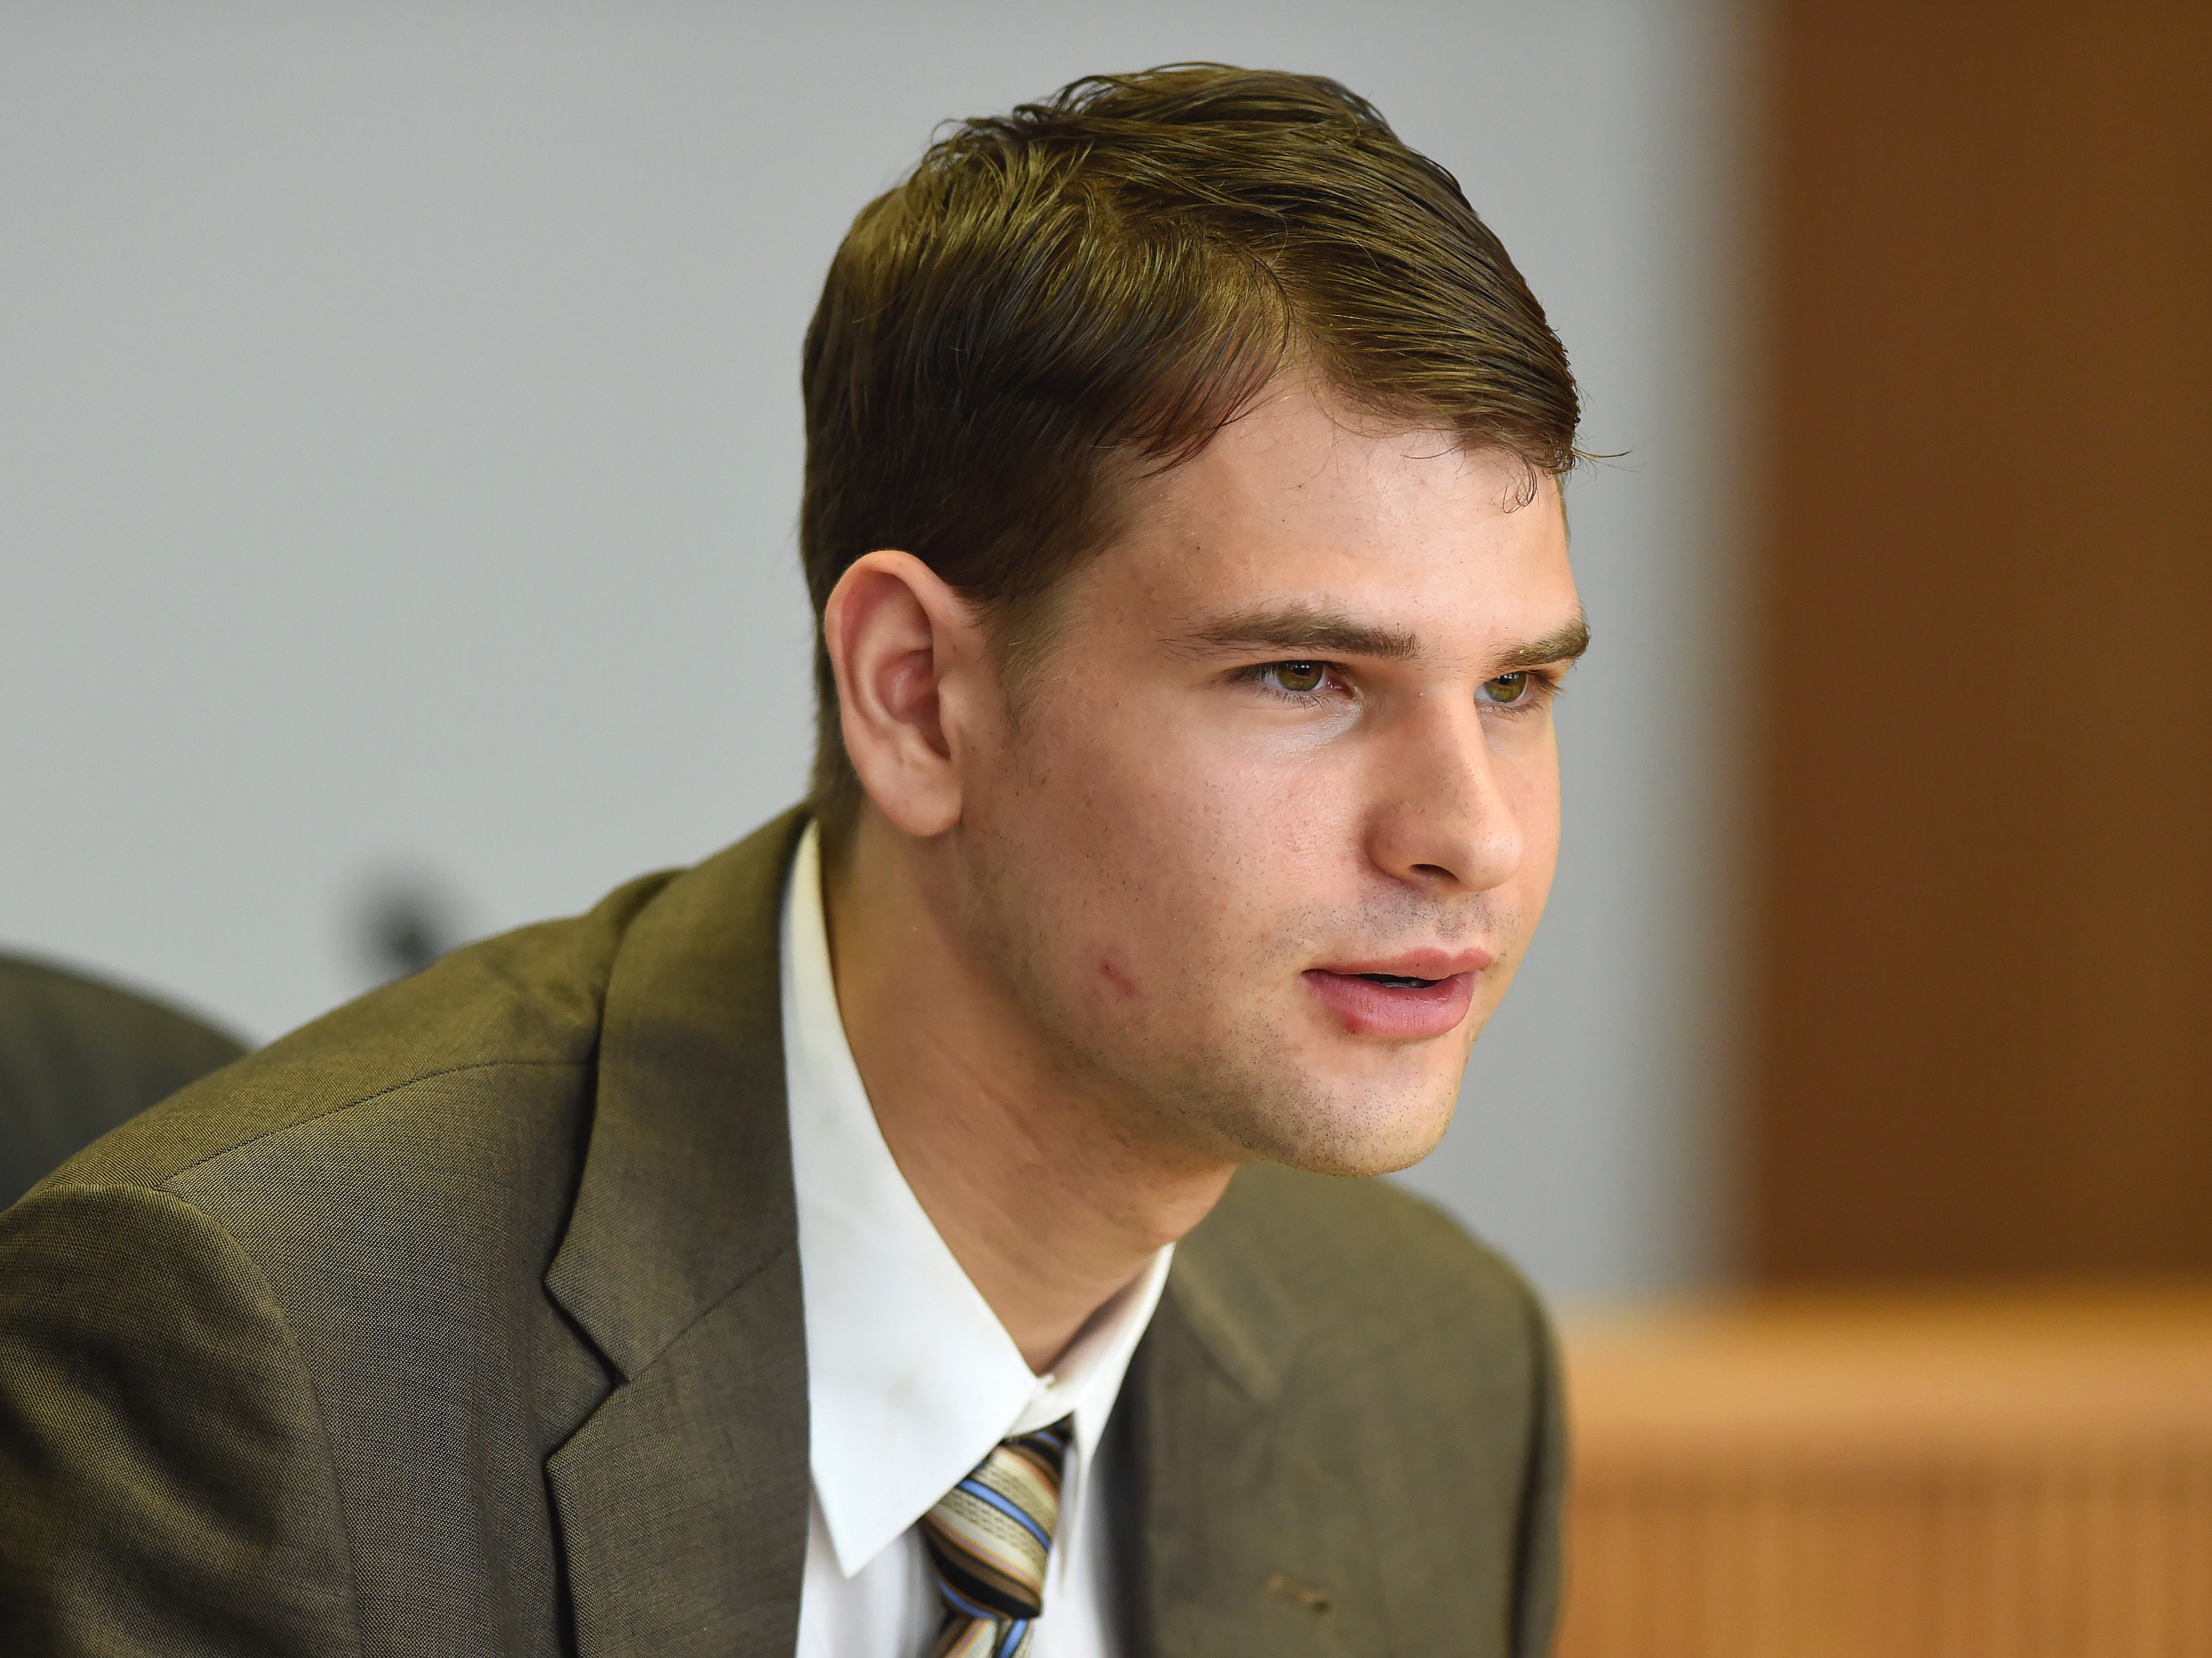 Nathan Carman appeared in court in 2018